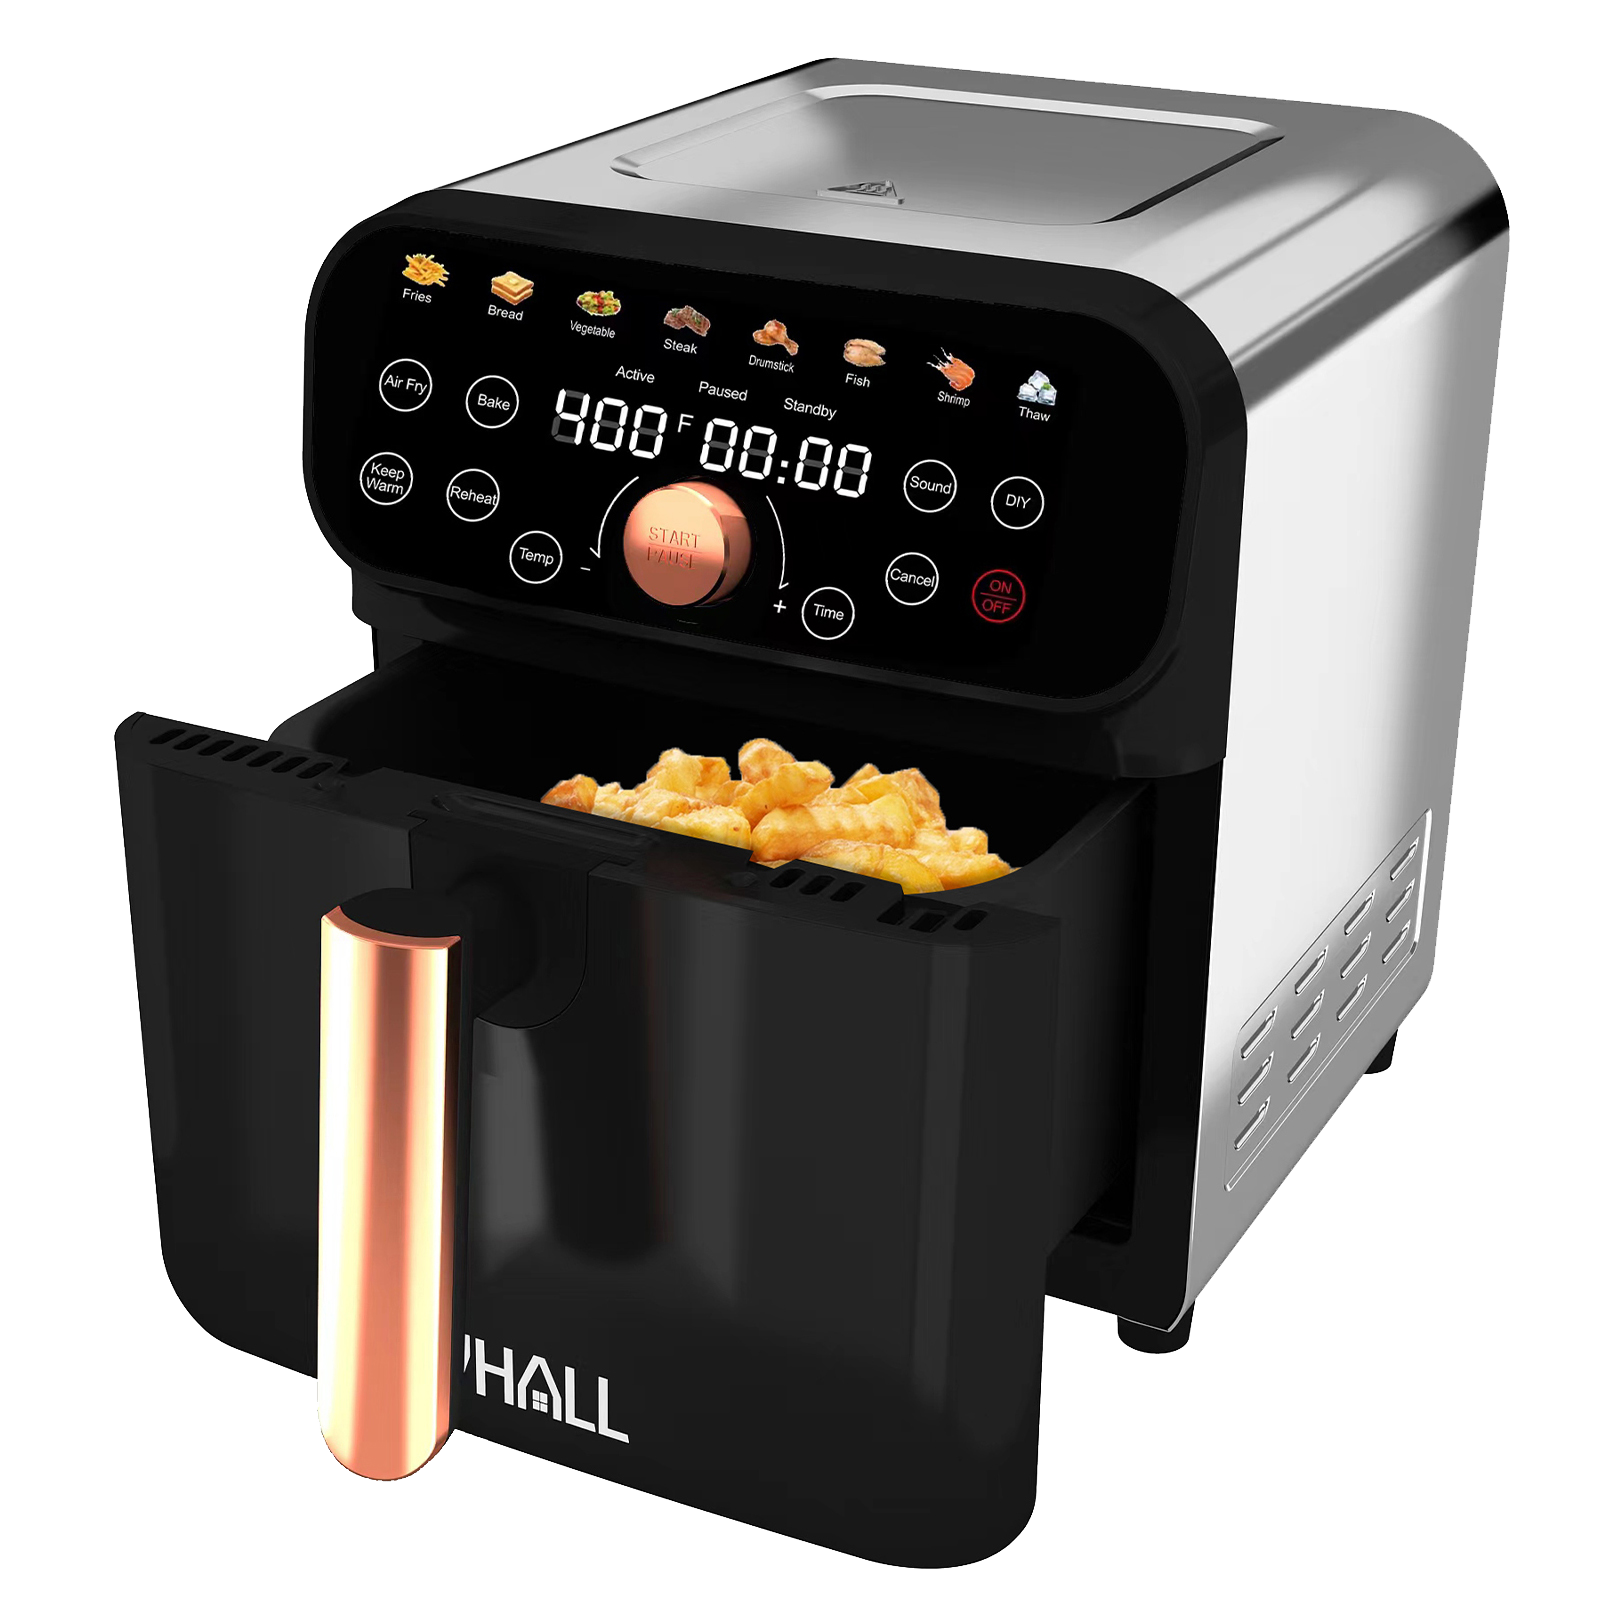 WHALL® Air Fryer - 6.2QT Air Fryer Oven, 12-in-1 Stainless Steel Air Fryer with LED Smart Touchscreen, Reduce 85% Fat, 1600W